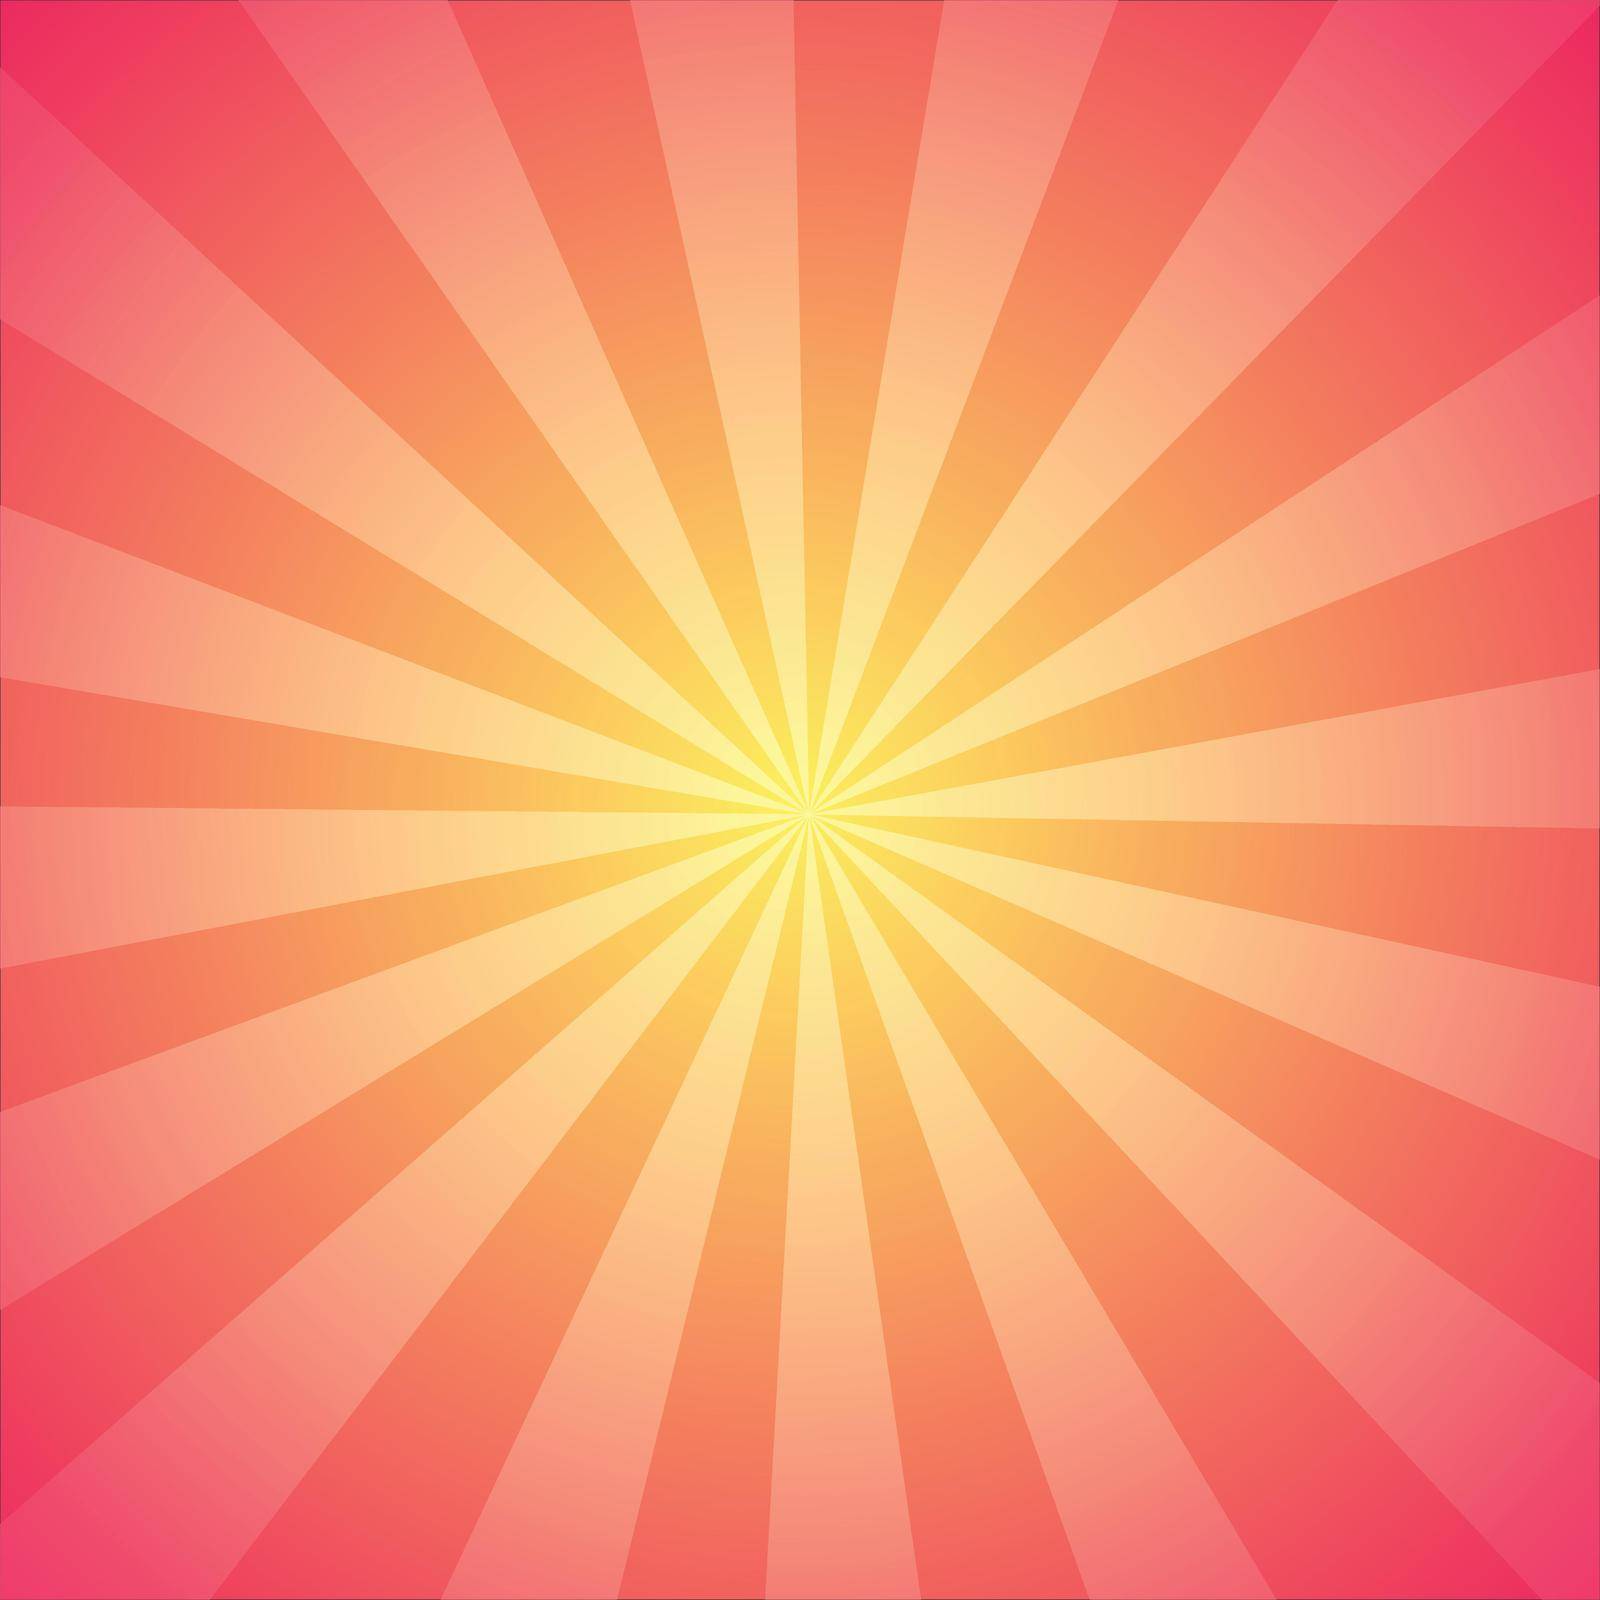 Background with sun rays - symbol of sunrise, Vector Backdrop in warm peachy orange color